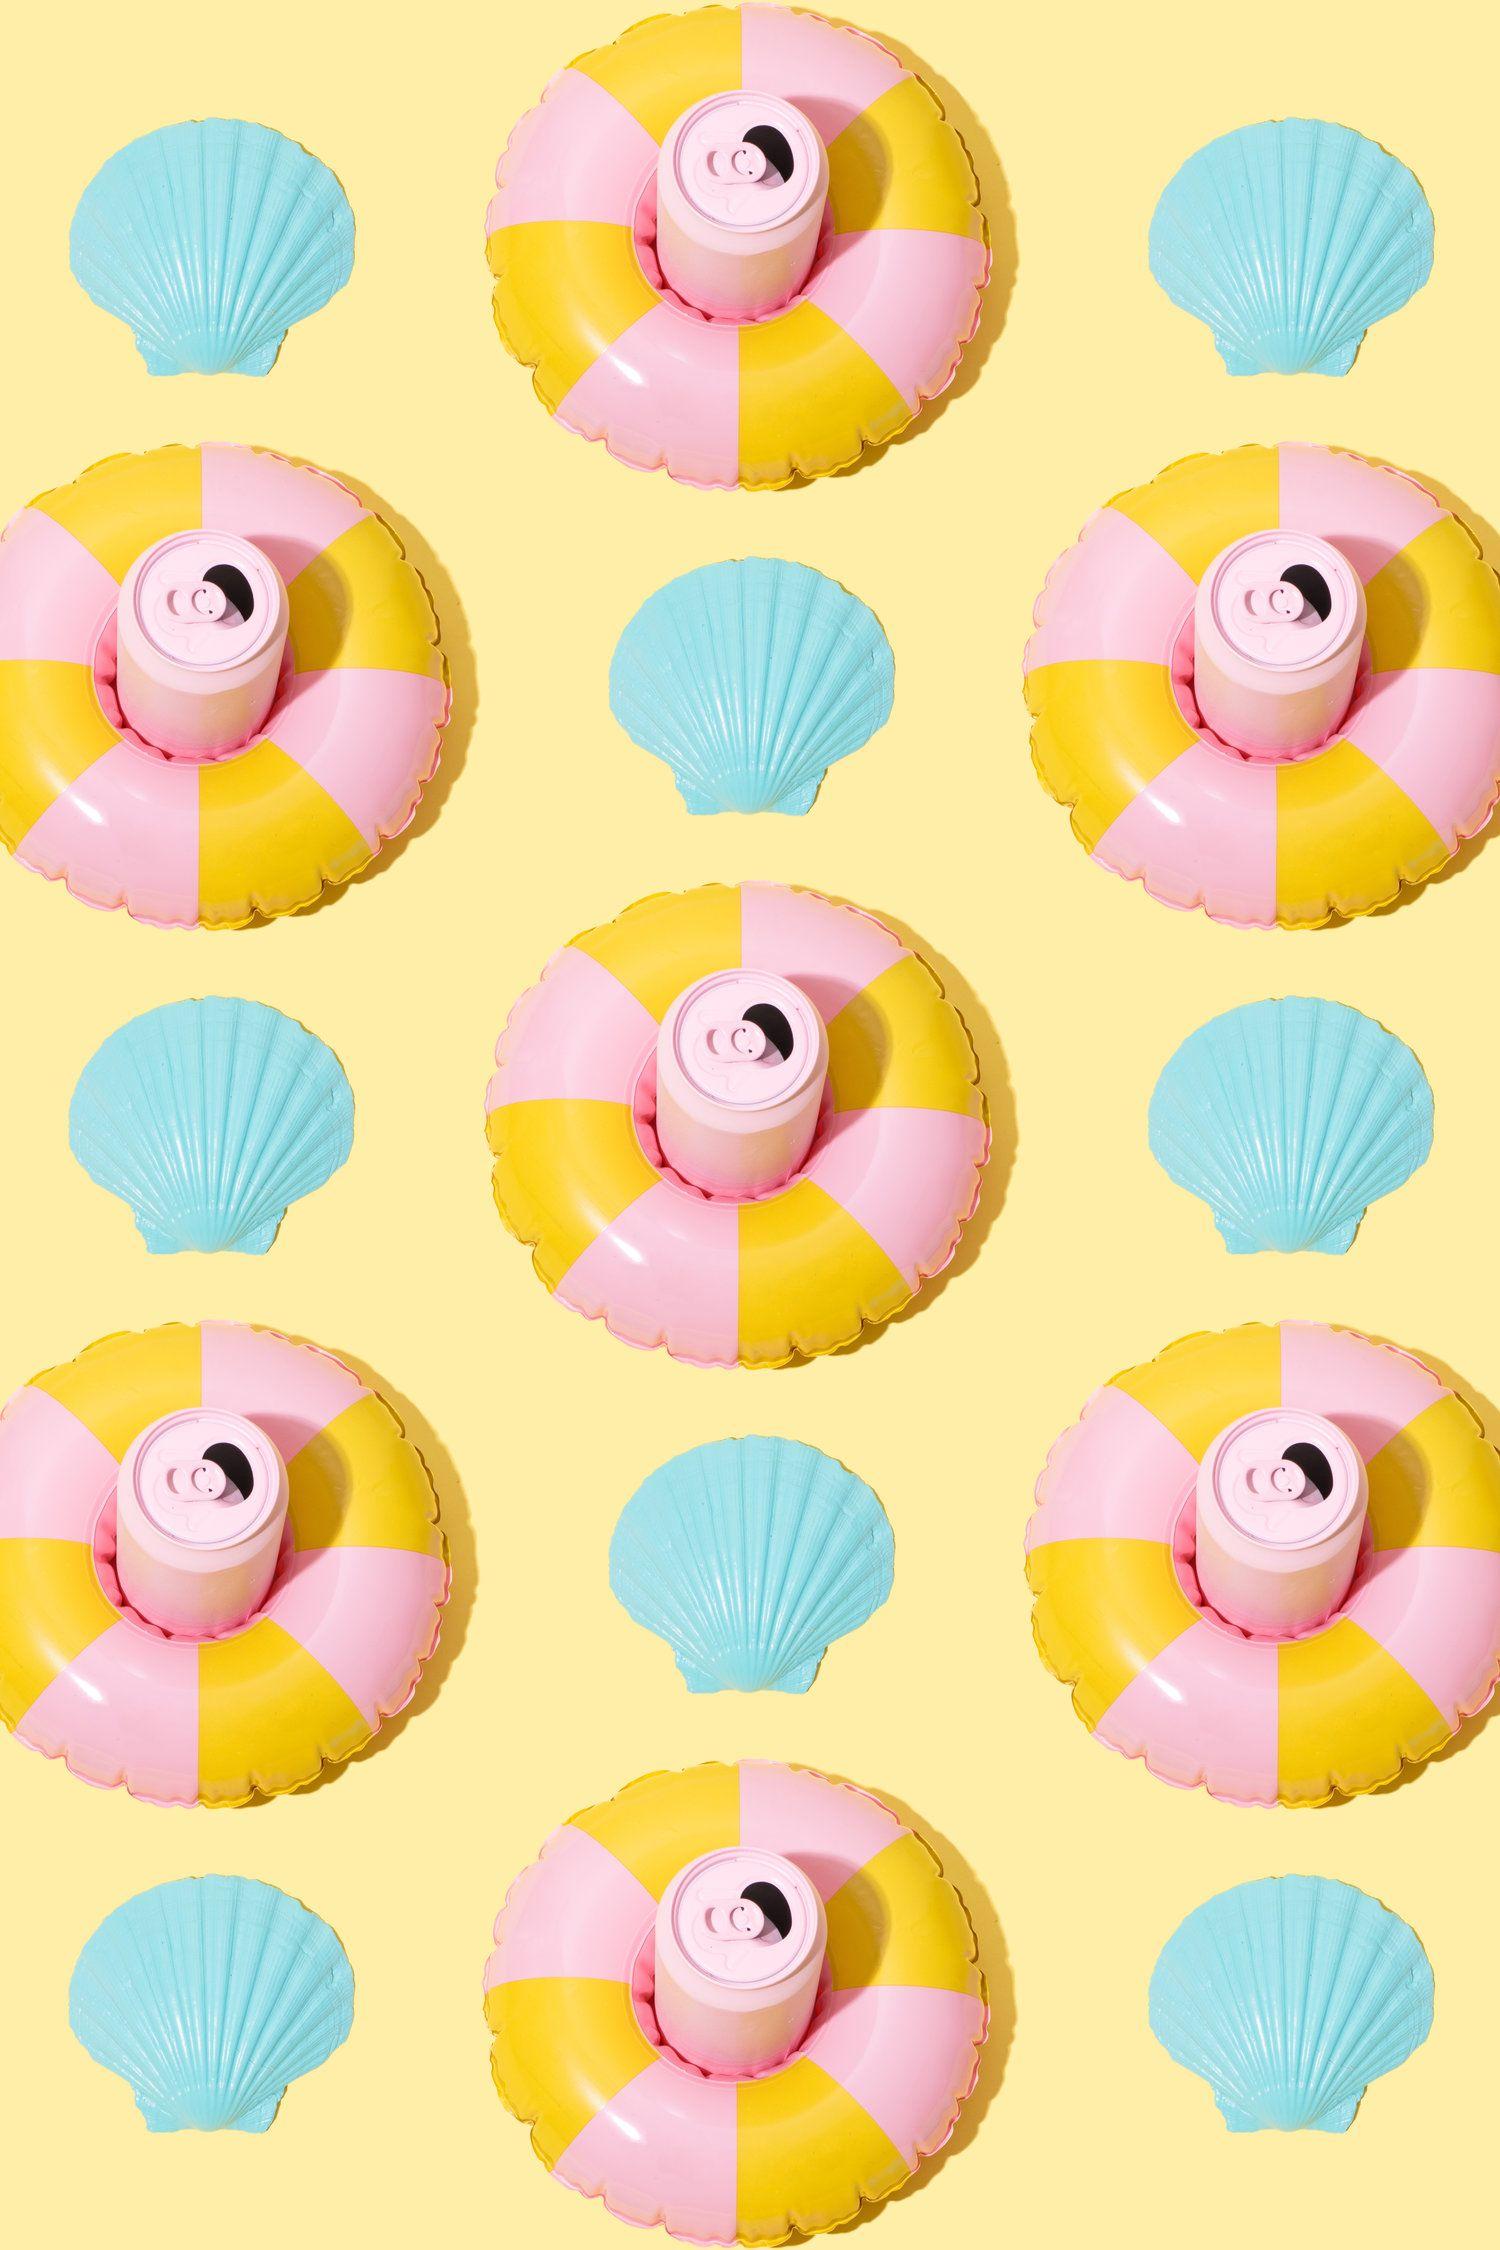 Pool Party // Wallpaper Download. Cute wallpaper background